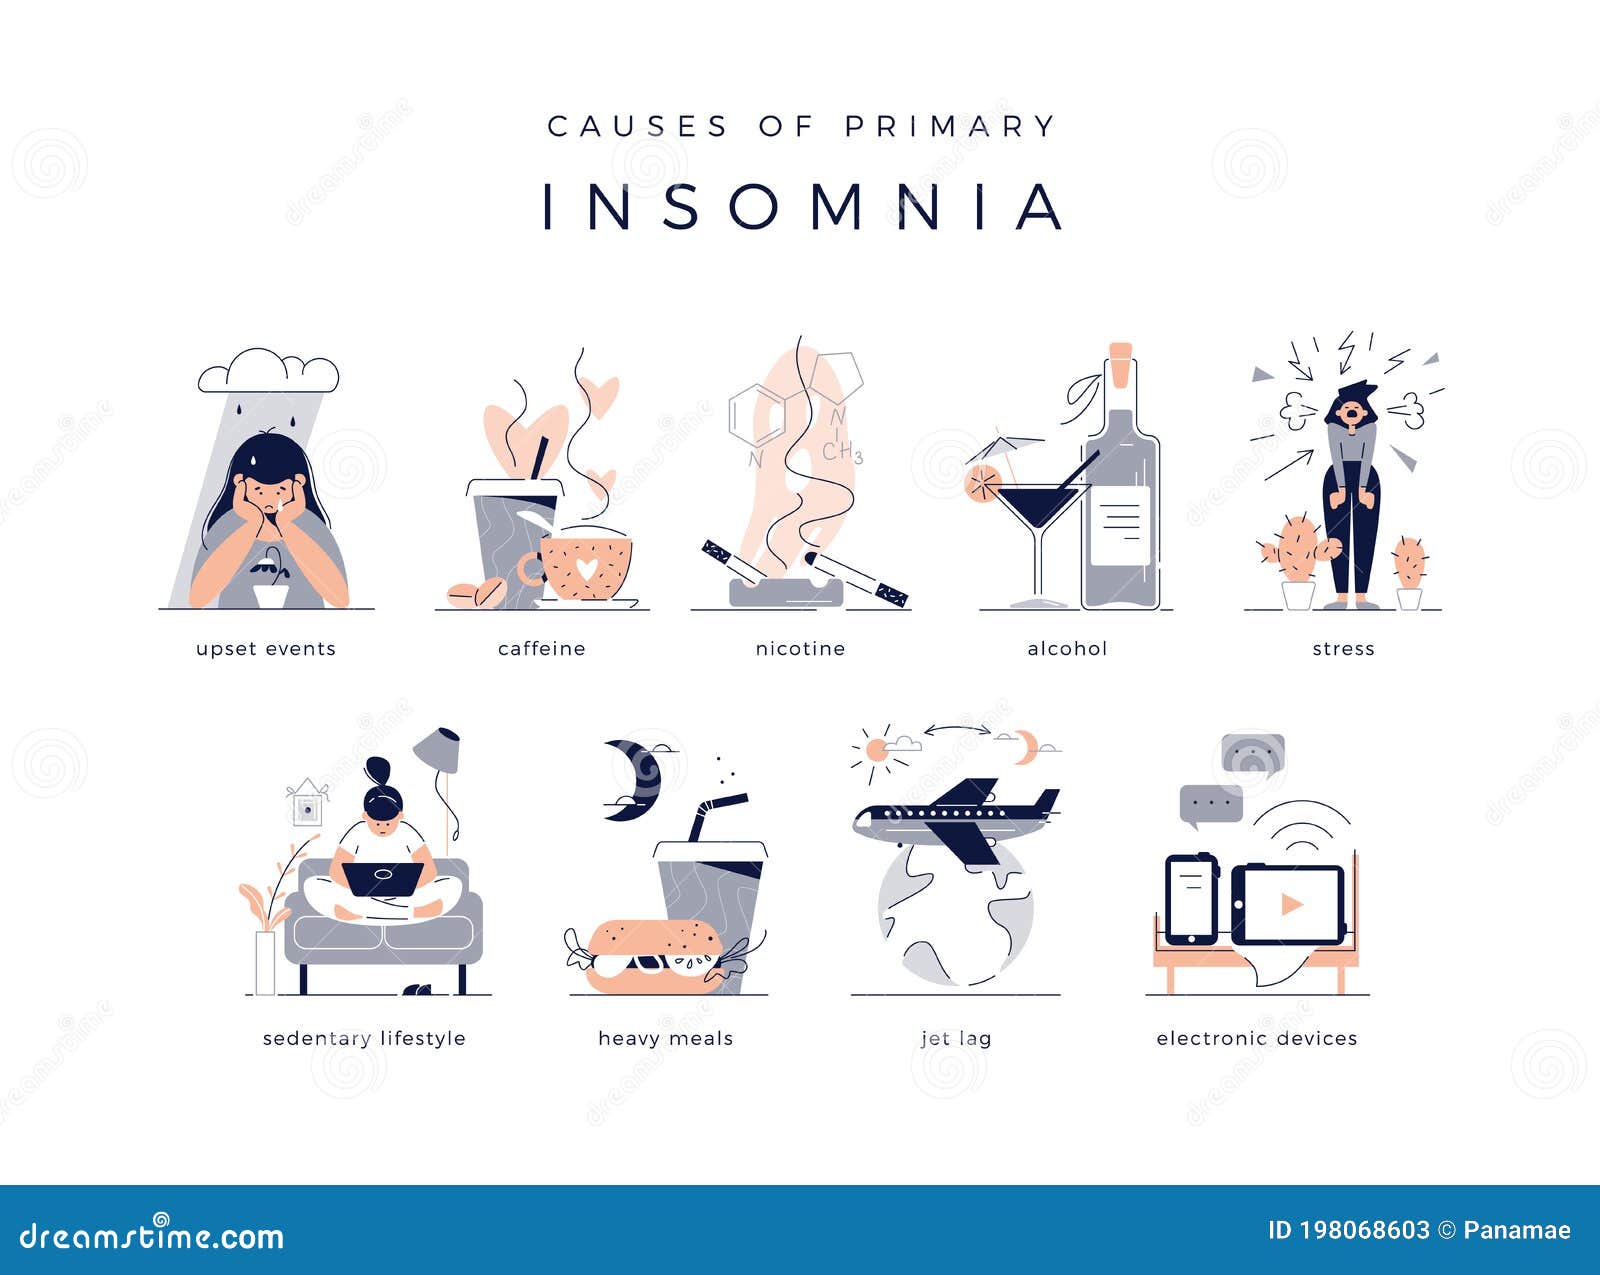 causes of primary insomnia. upset events, stress, depression, sedentary lifestyle, jet lag. bad habits: electronic